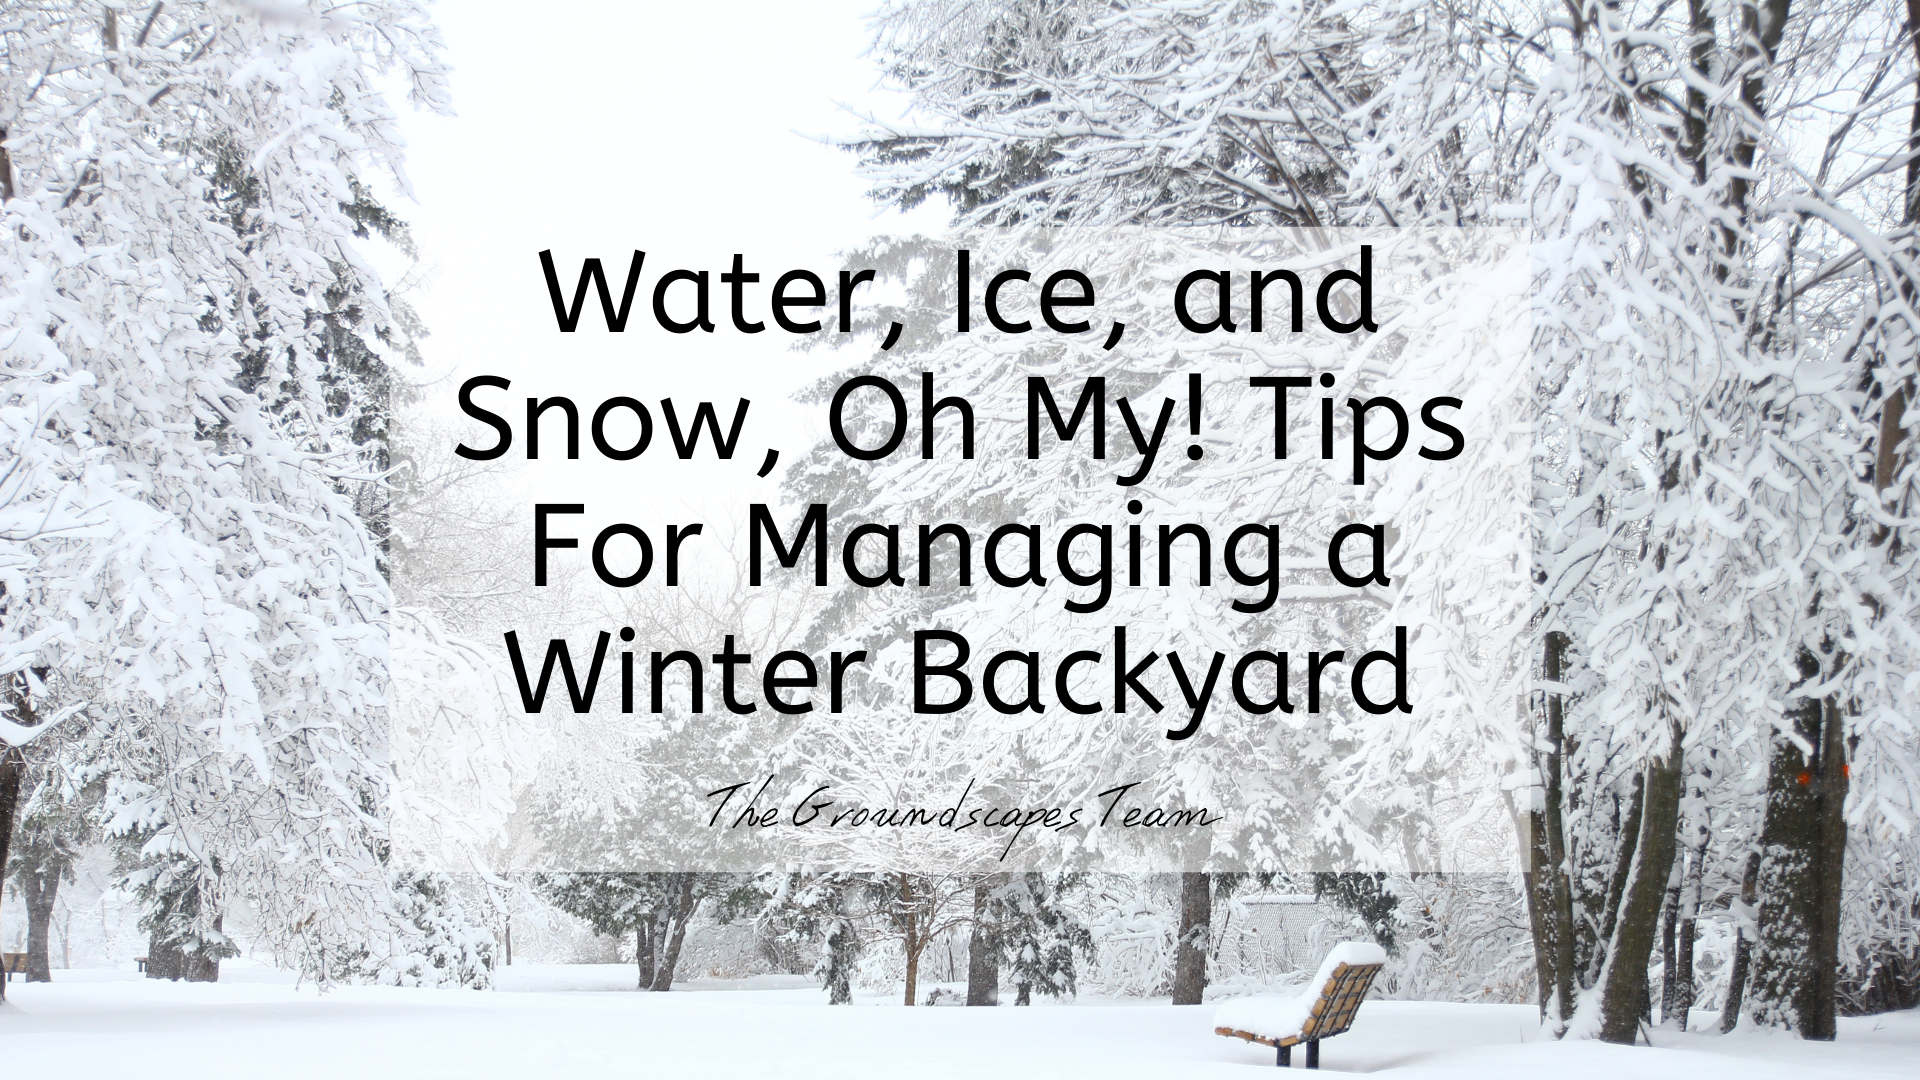 Water, Ice, and Snow, Oh My! Tips For Managing a Winter Backyard